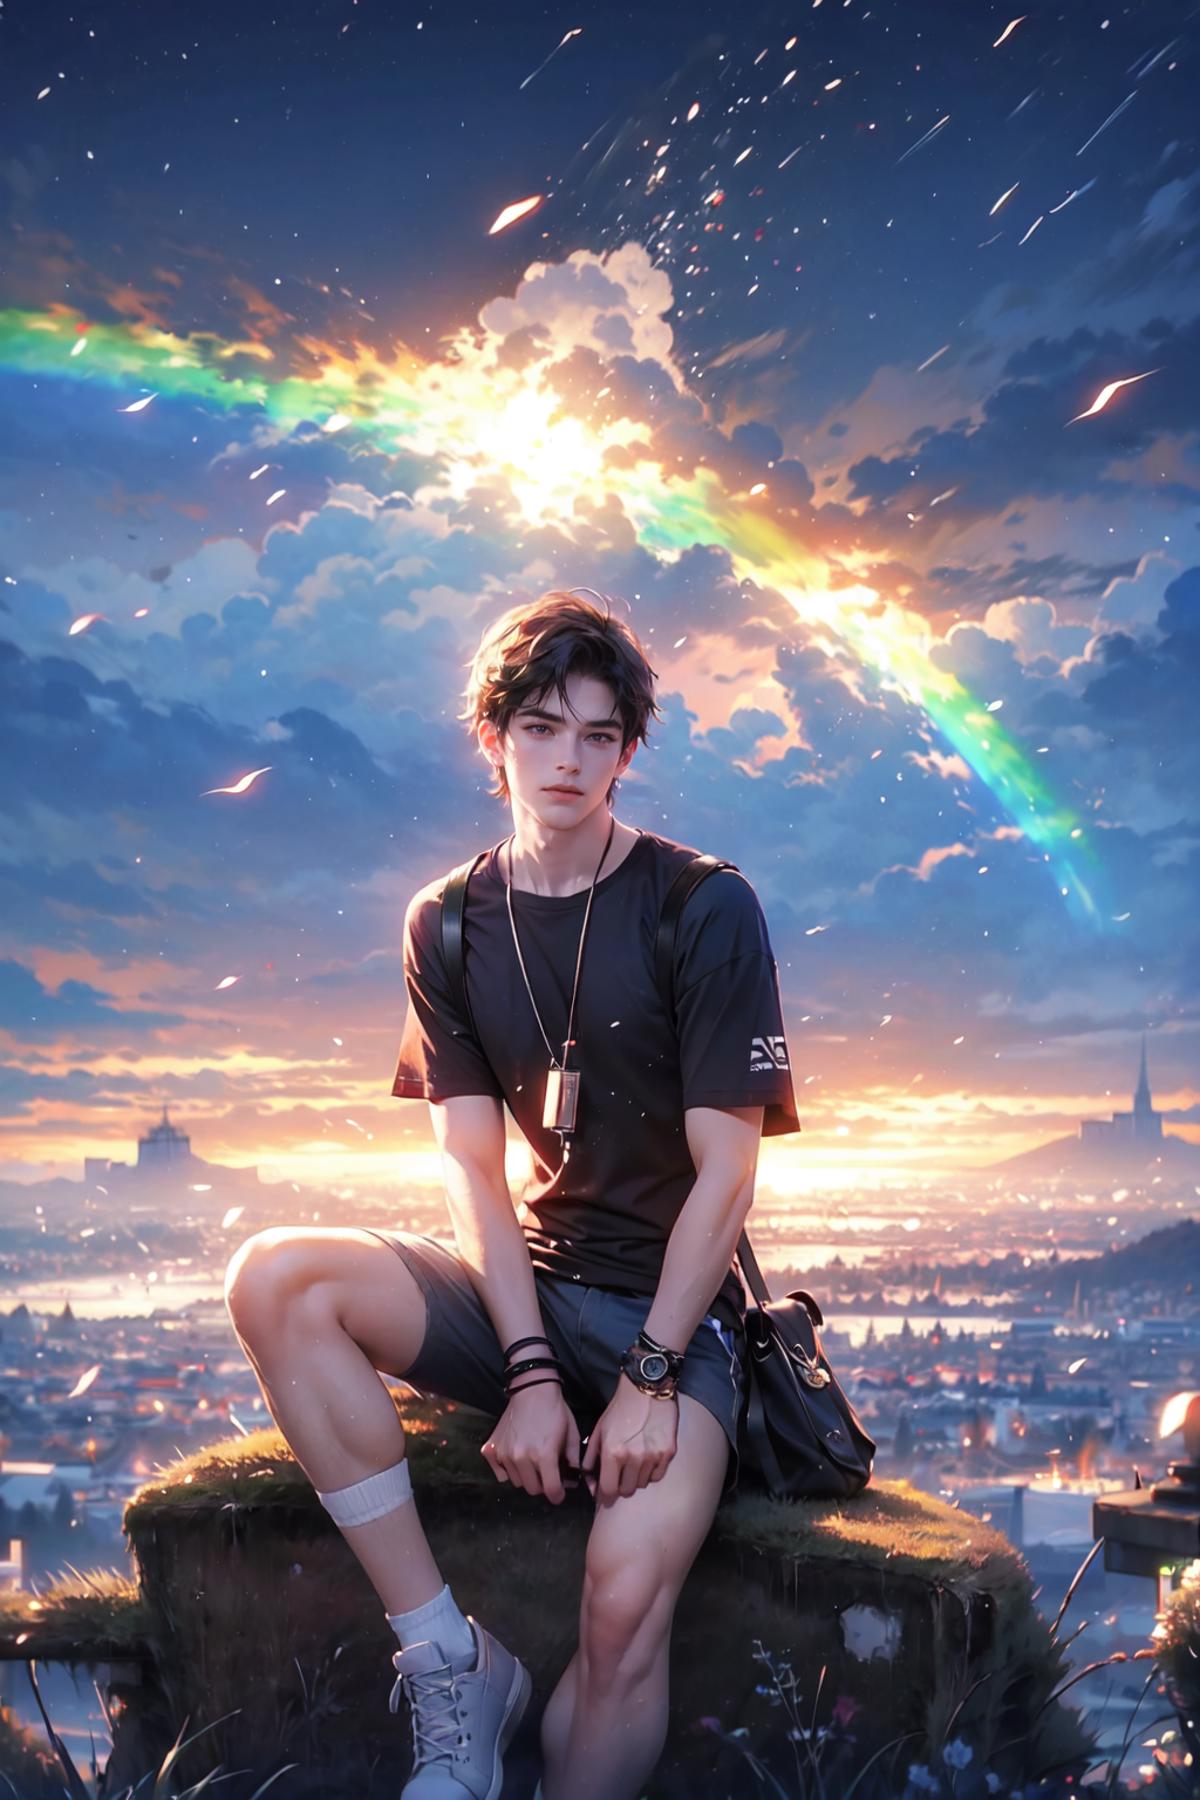 The image features a young man sitting on top of a rock, overlooking a city with a backdrop of a colorful rainbow. He is wearing a black shirt and shorts and has a watch on his wrist. The scene appears to be an artistic depiction, possibly in a manga style. The man is also holding a handbag, which adds to the overall composition of the image.